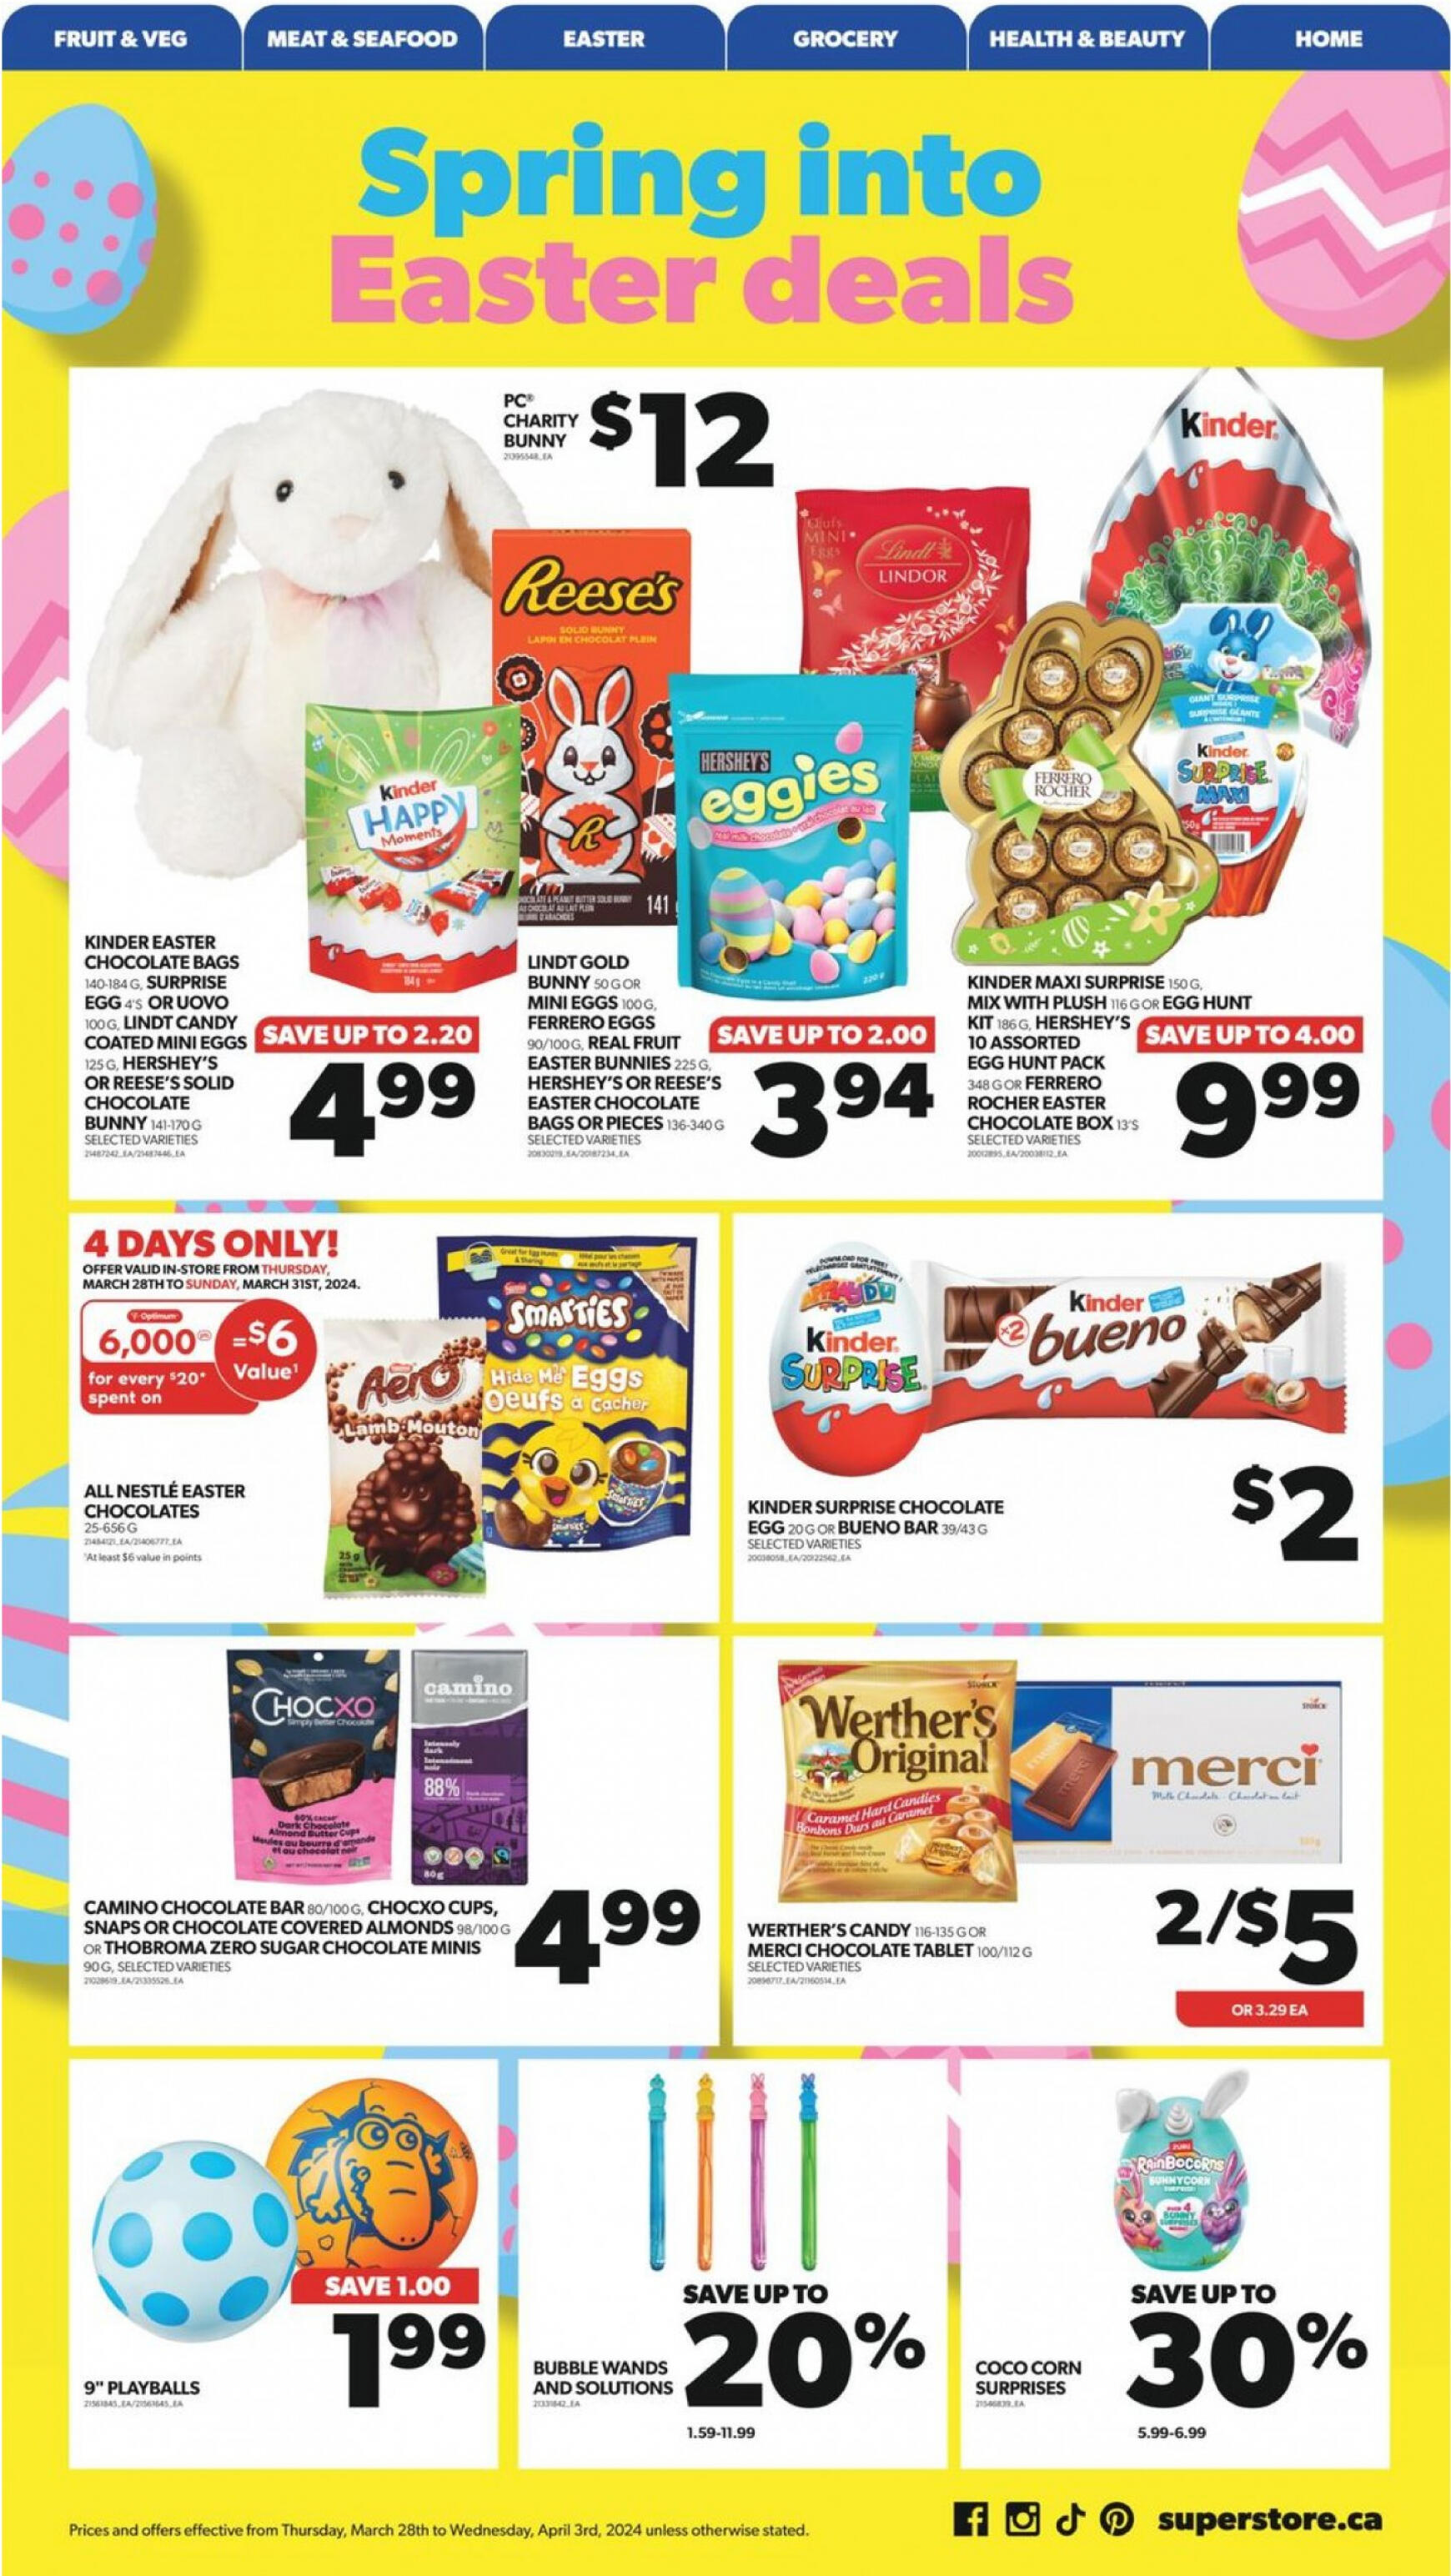 real-canadian-superstore - Real Canadian Superstore flyer current 28.03. - 03.04. - page: 9